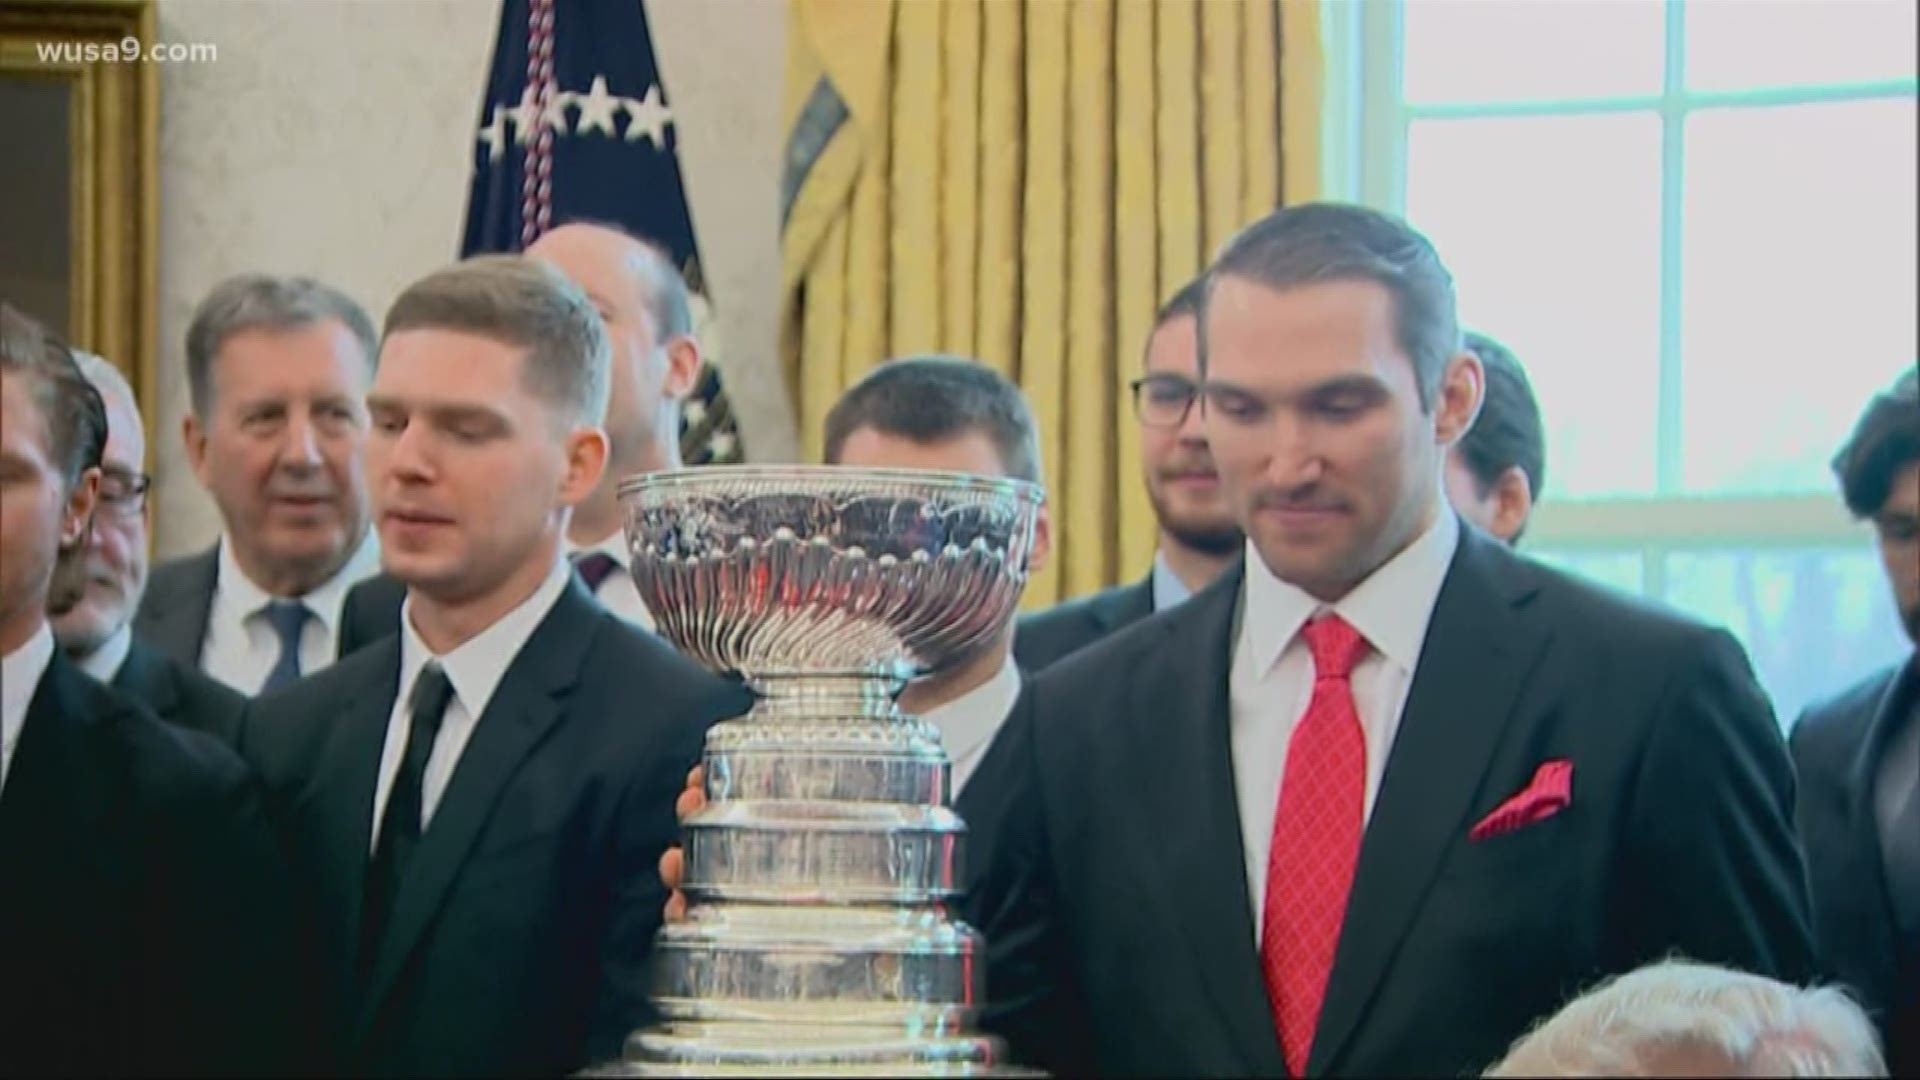 The Capitals are the first major D.C. sports team to have visited the White House in 26 years.